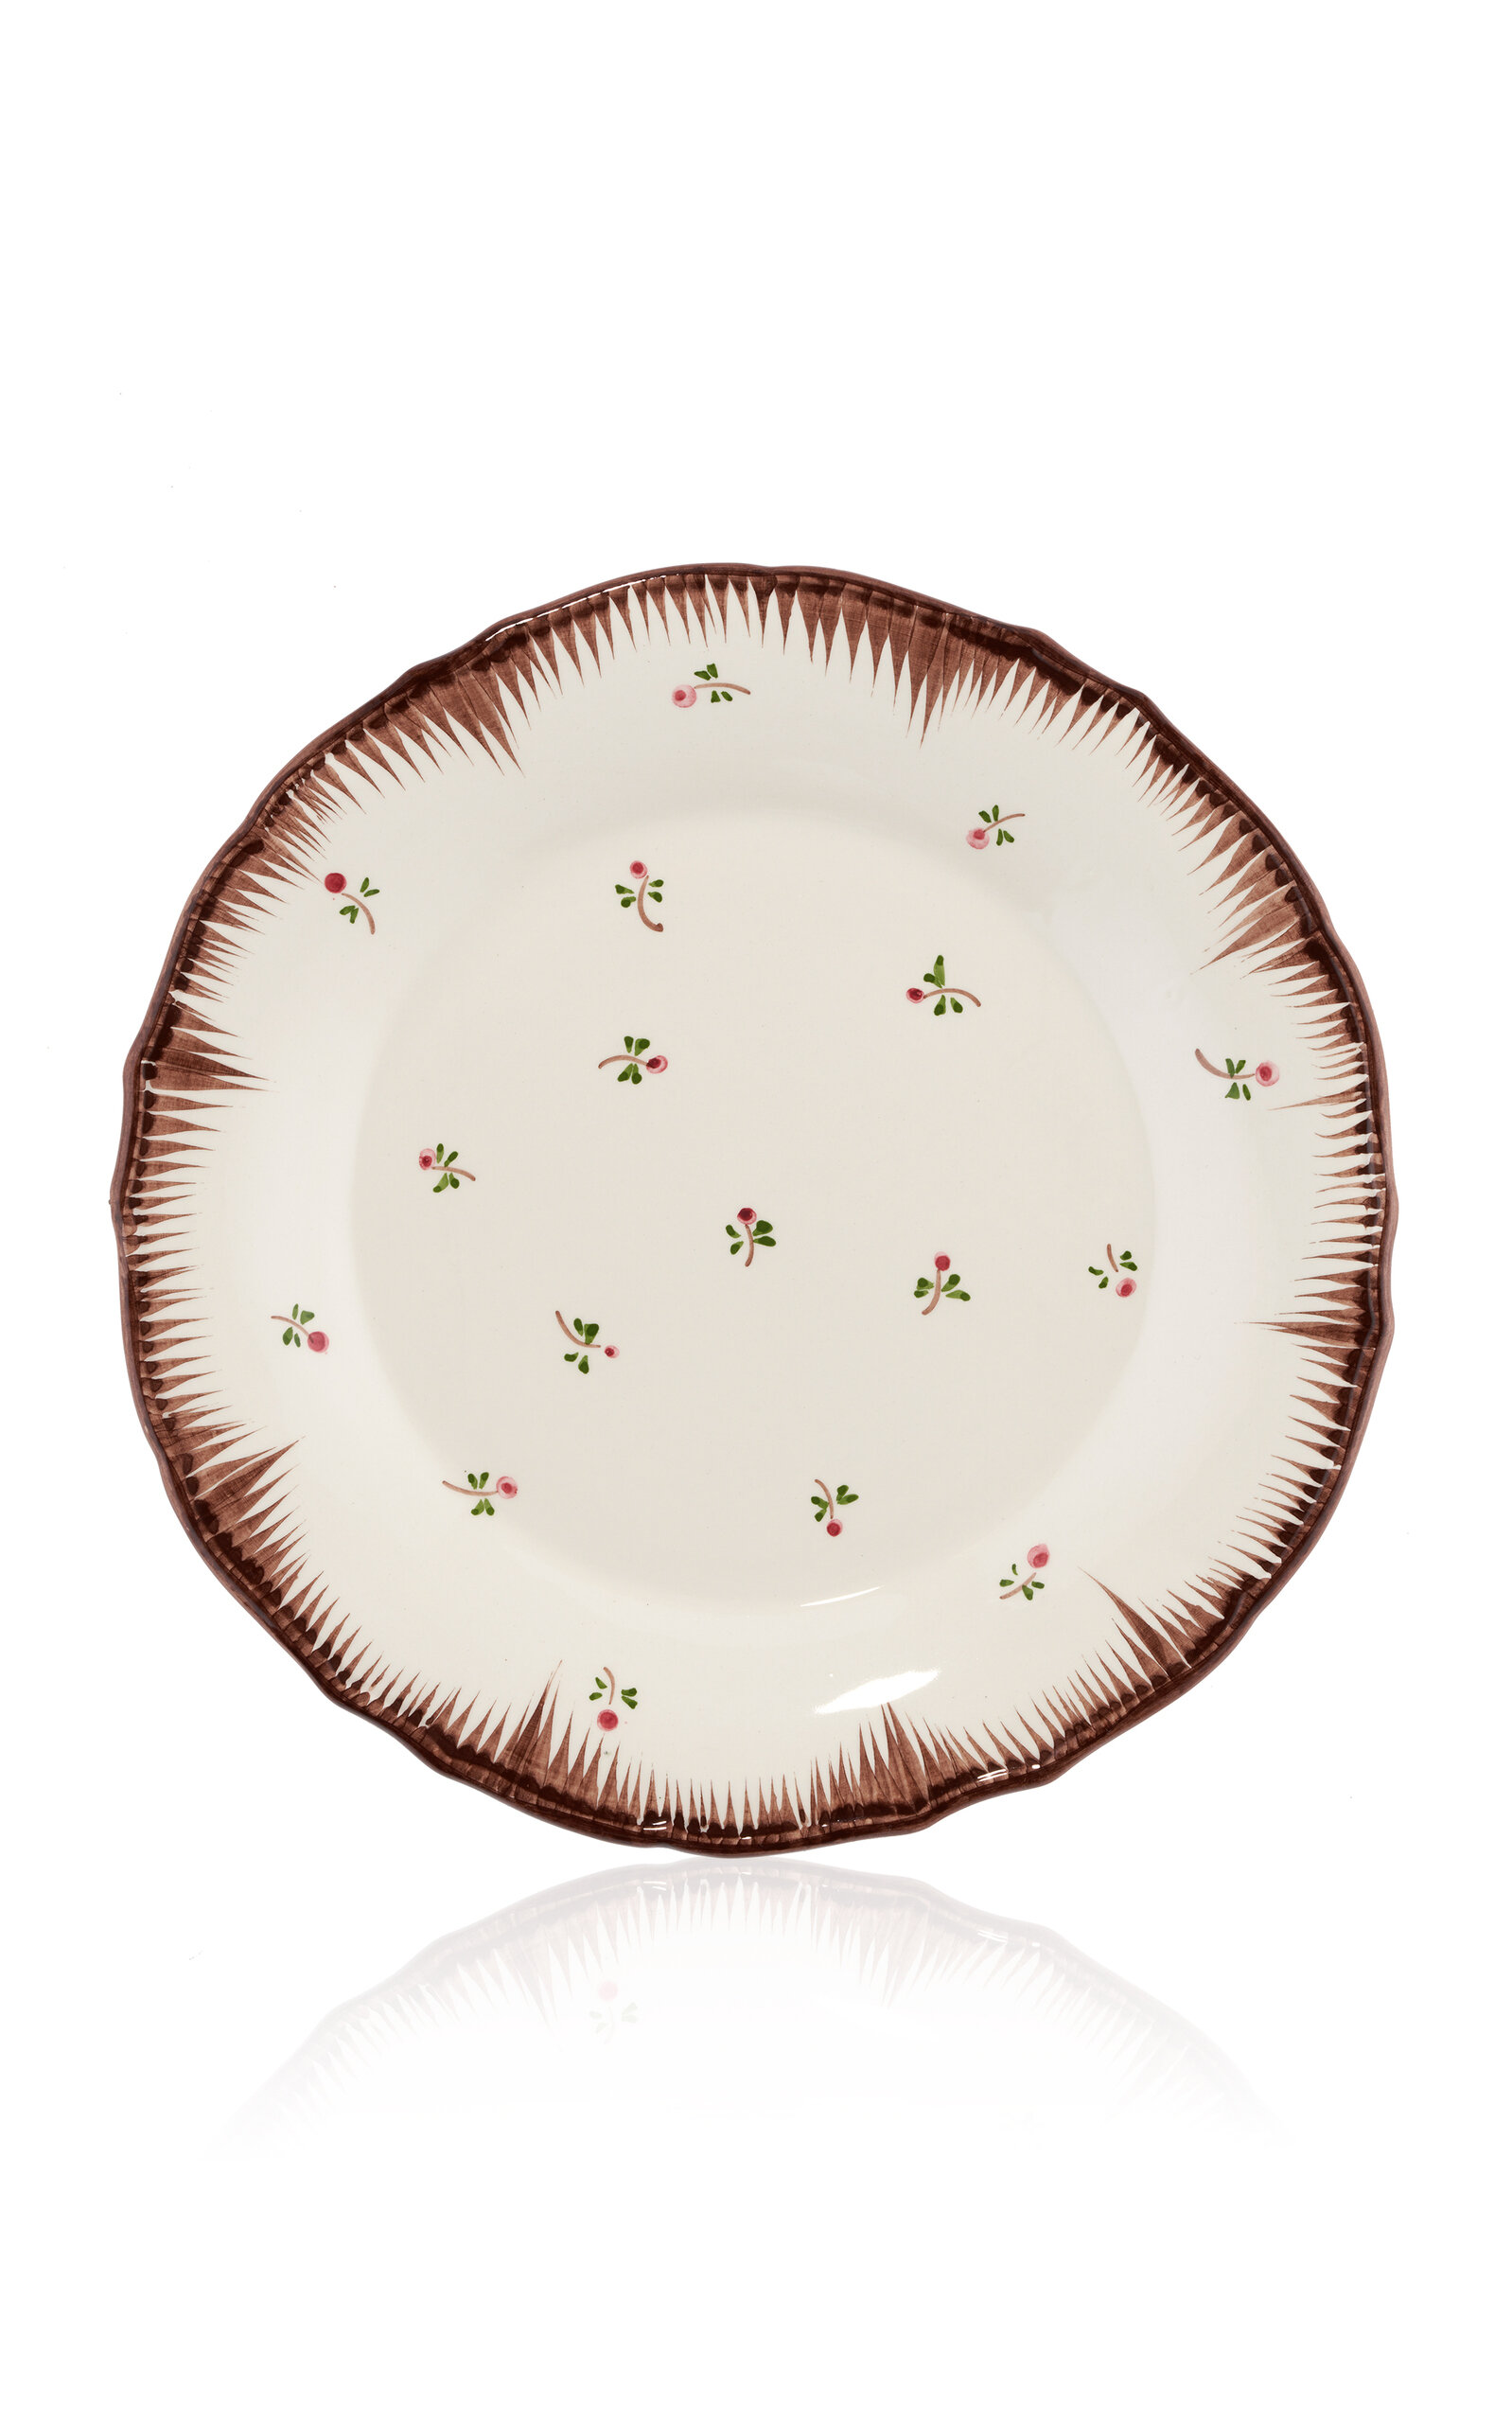 Remy Renzullo X Carolina Irving & Daughters Lily Dessert Plate In Brown